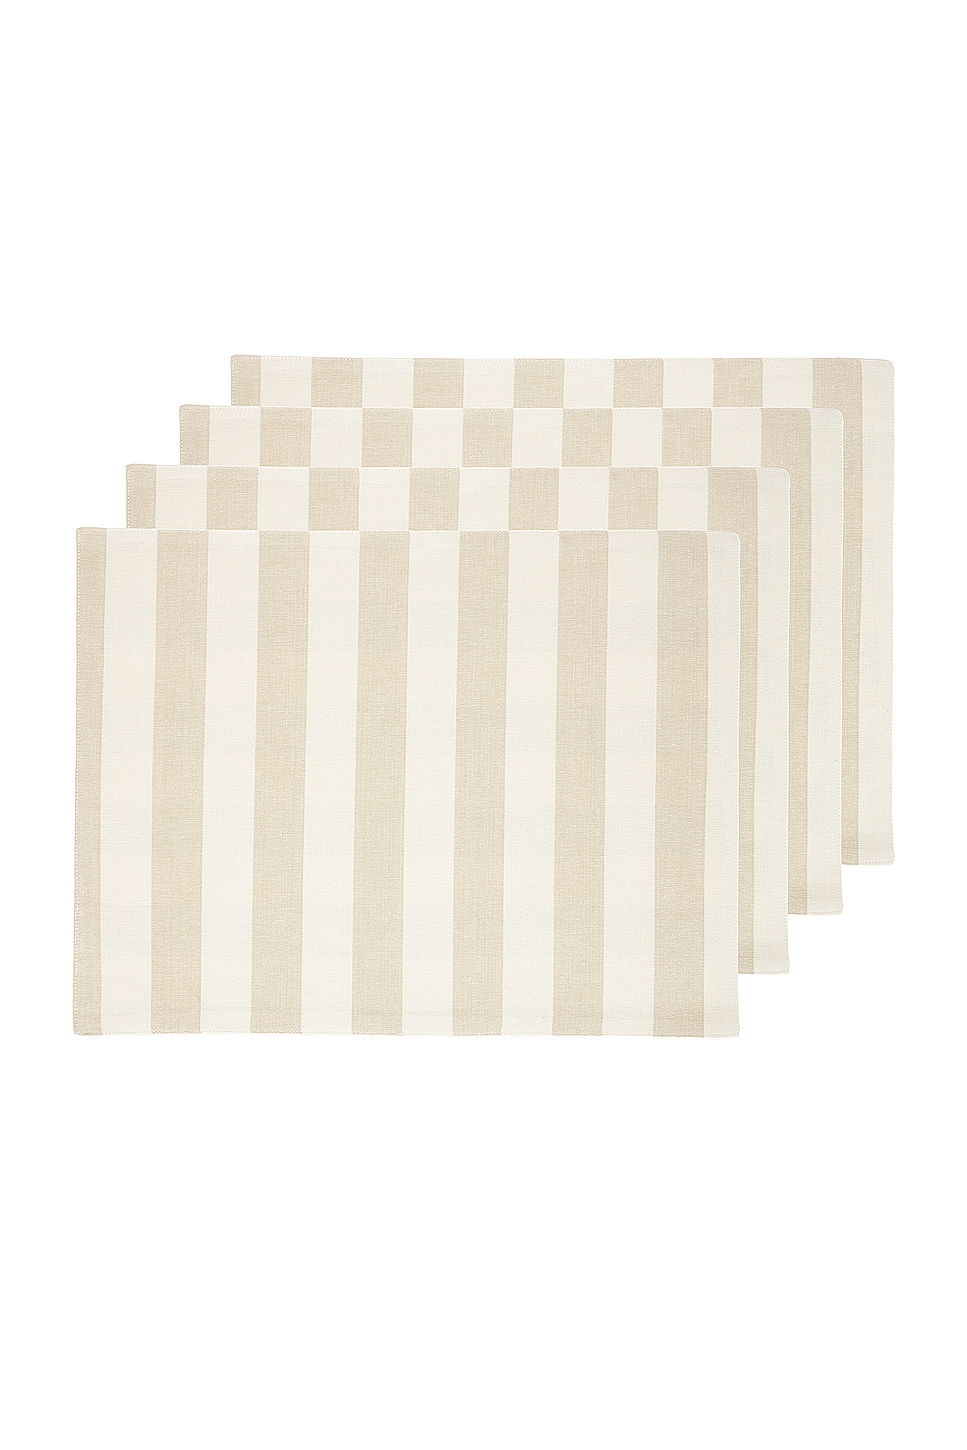 Image 1 of HAWKINS NEW YORK Essential Striped Set Of 4 Placemats in Ivory & Flax